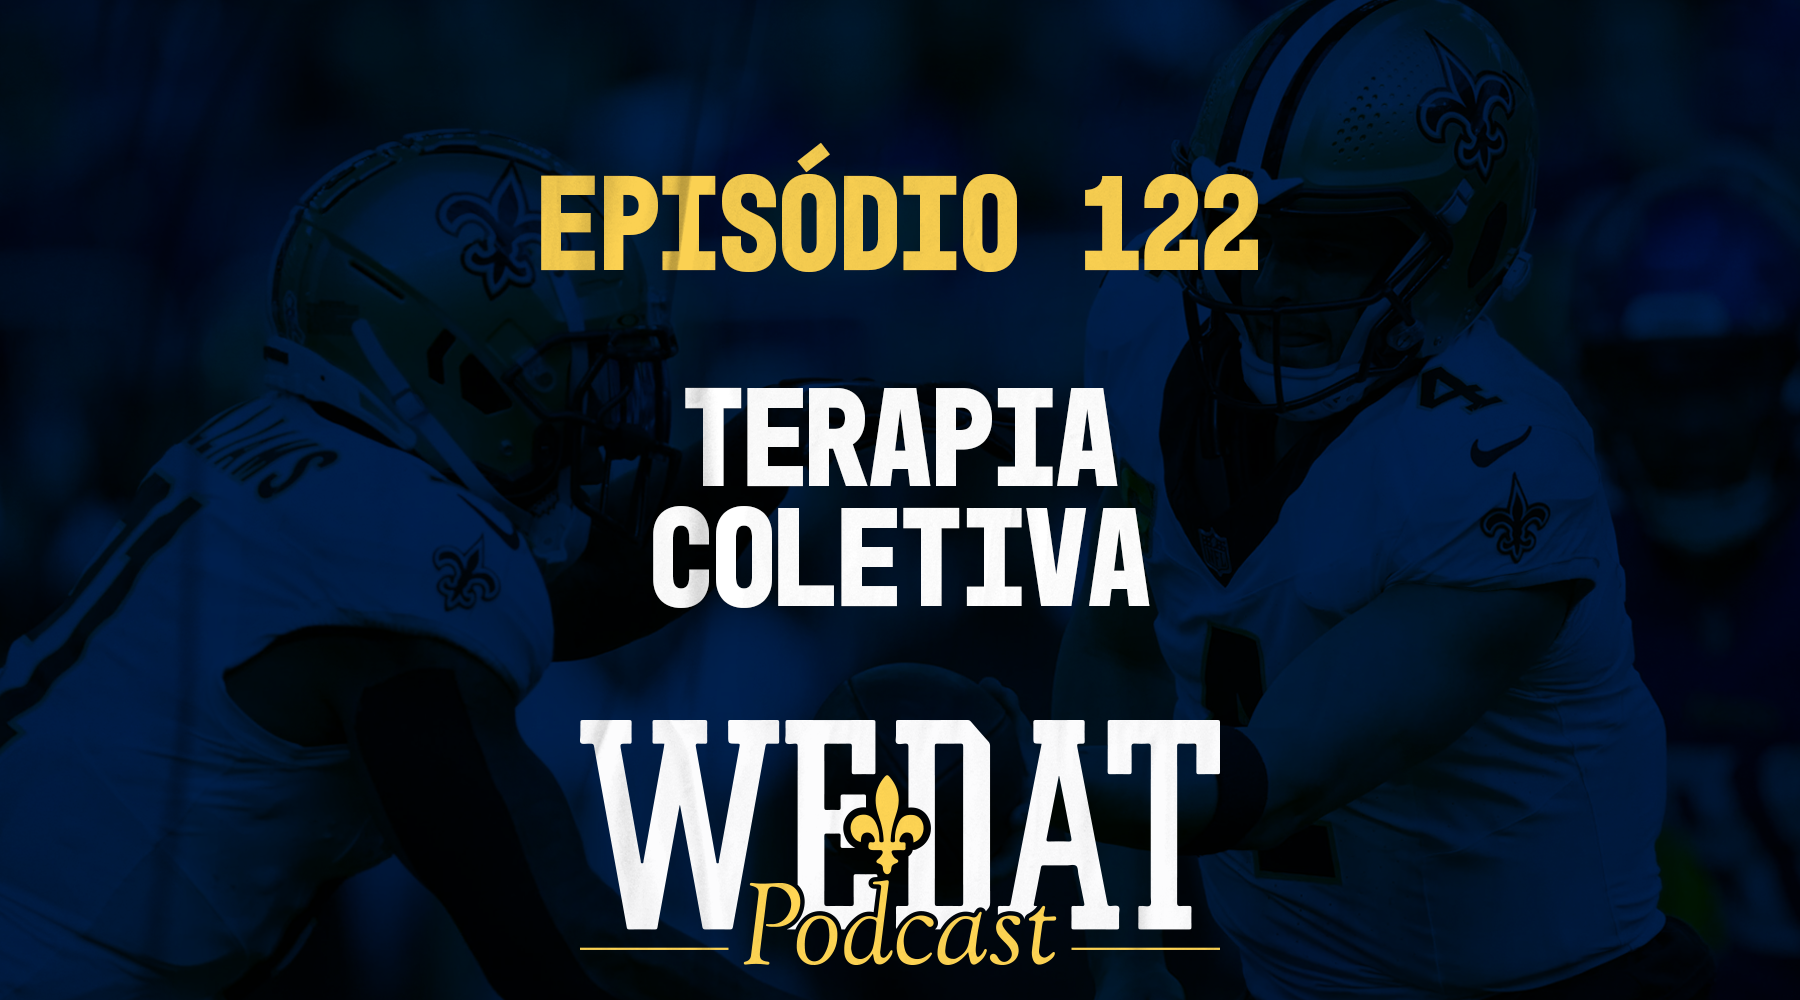 We Dat Podcast #122 – Terapia Coletiva